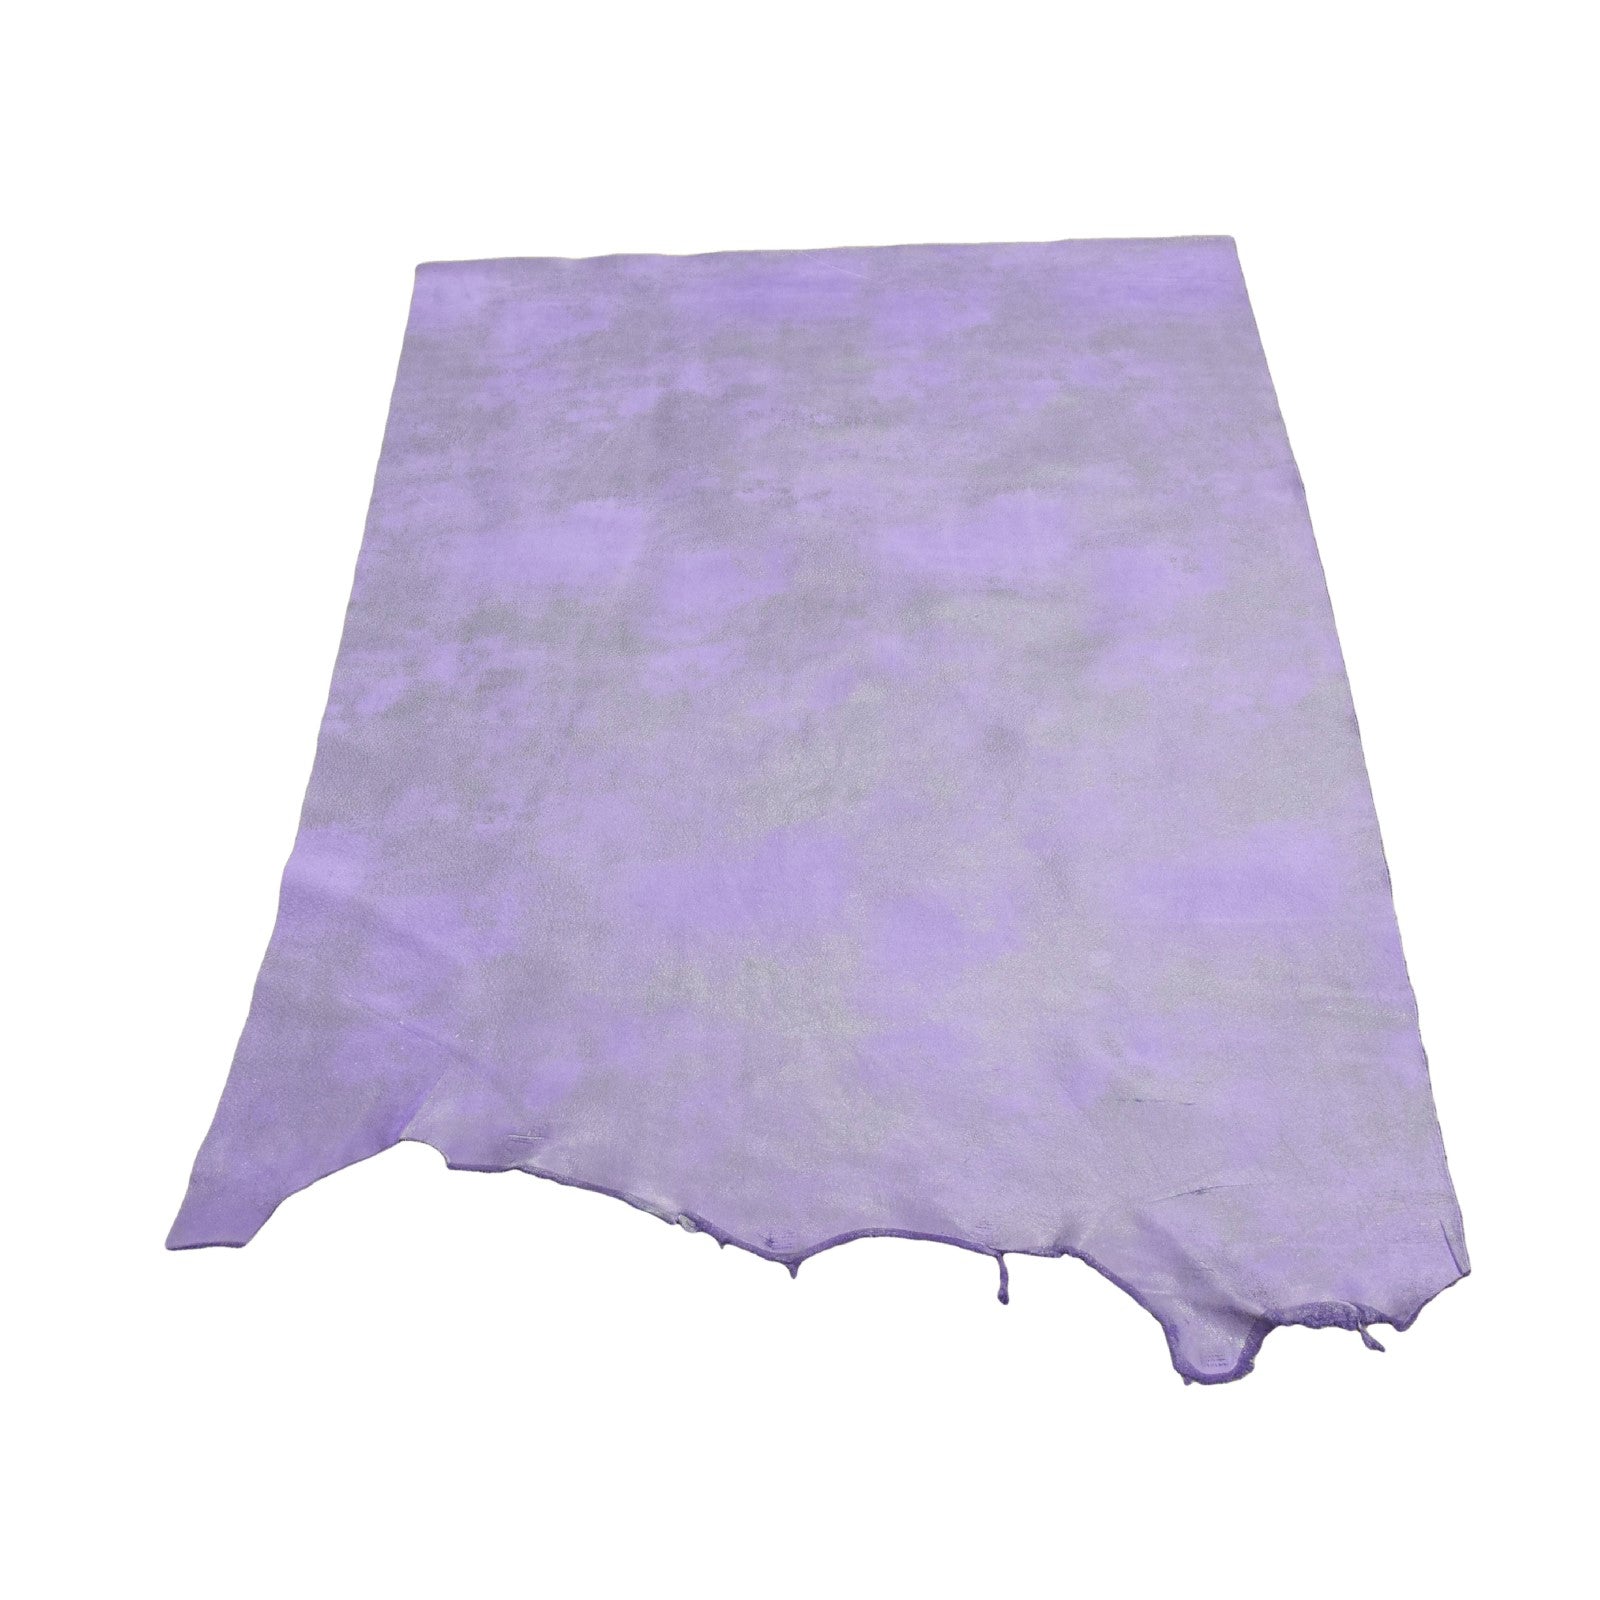 Dearly Beloved Purple Rock N Roll 2-3 oz Leather Cow Hides, 6.5-7.5 Square Foot / Project Piece (Middle) | The Leather Guy